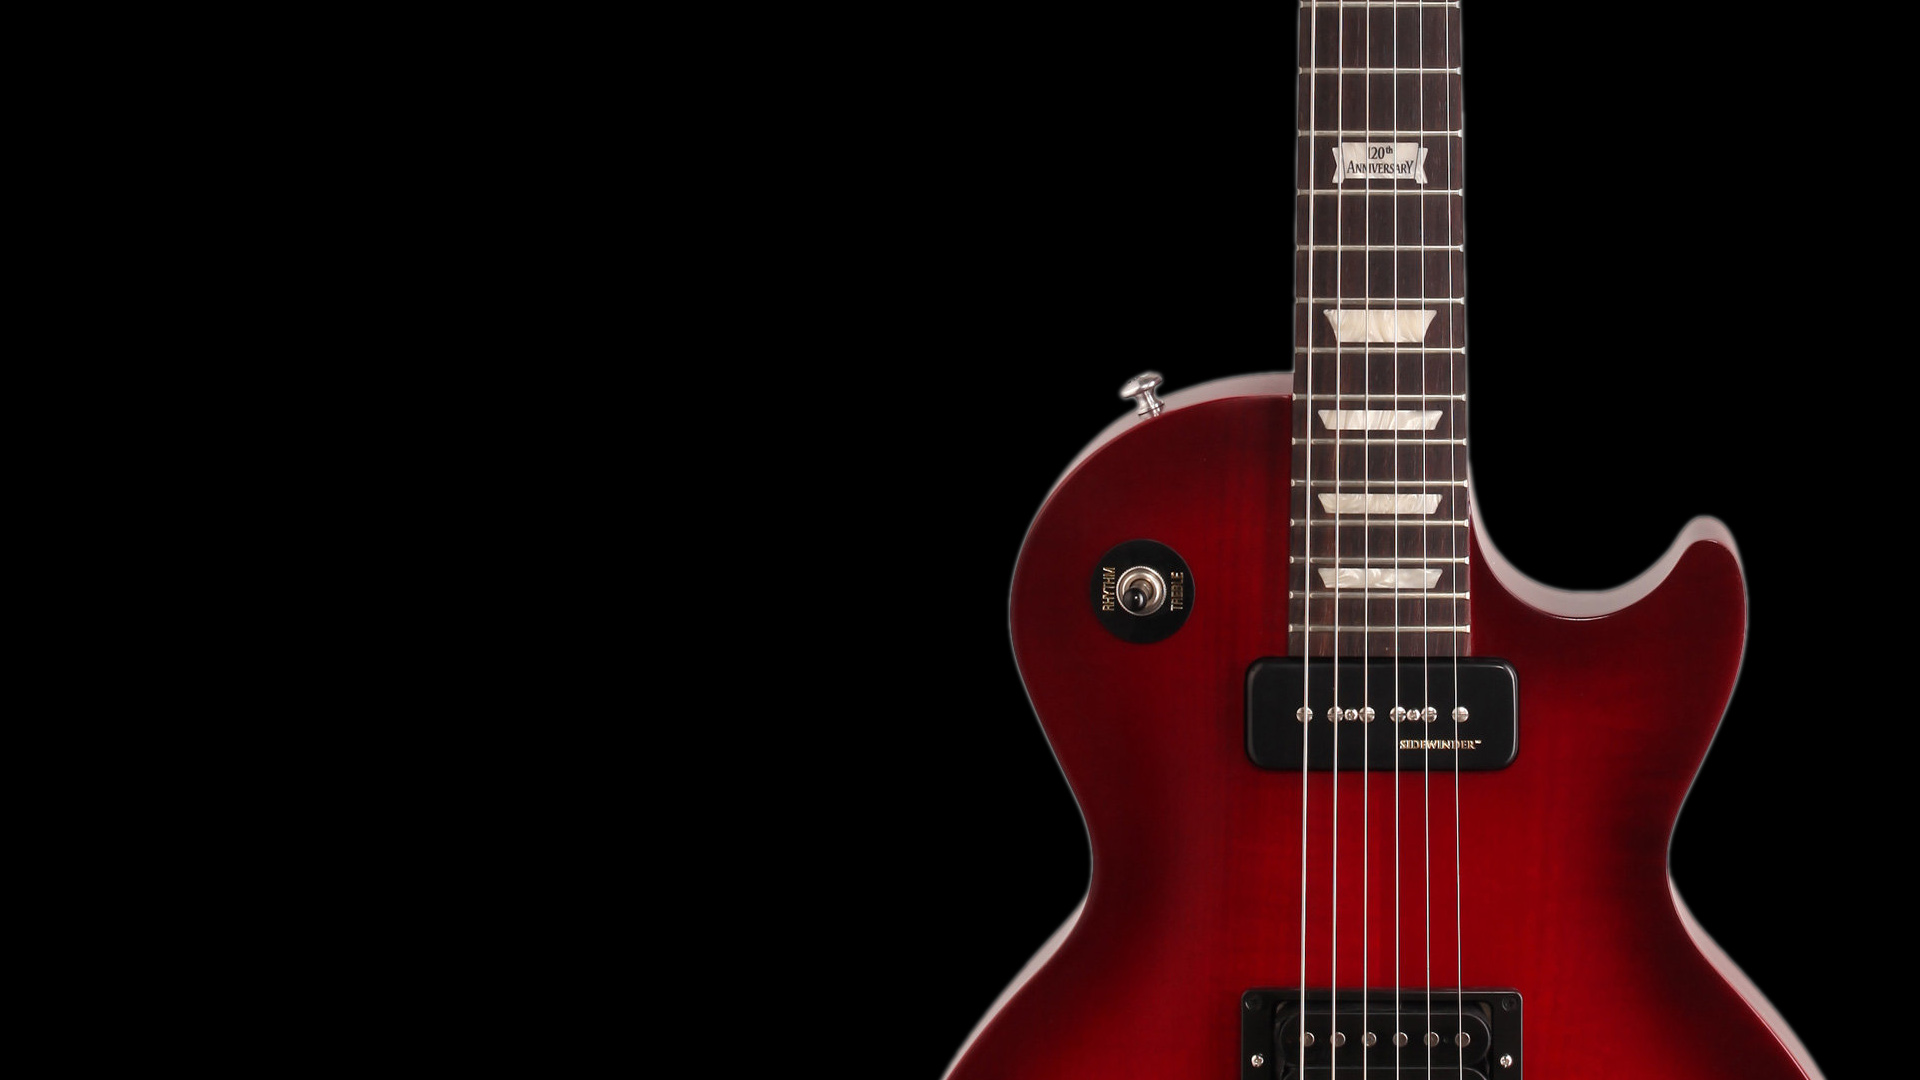 Gibson HD Wallpaper | Background Image | 1920x1080 | ID ...